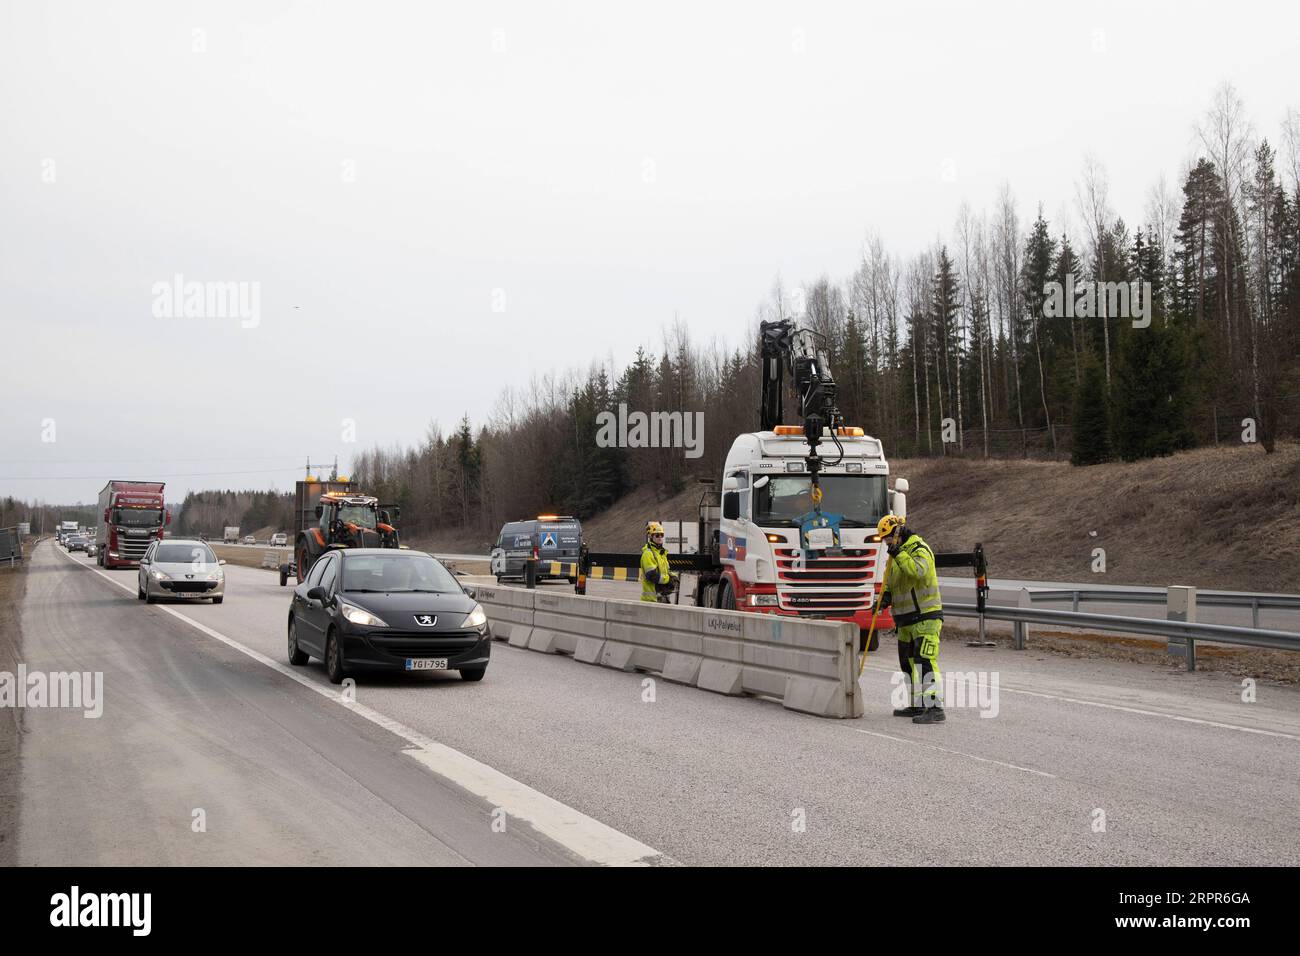 200328 -- HELSINKI, March 28, 2020 Xinhua -- Road workers and local police set up checkpoints on a road in Hyvinkaa, on the northern edge of the Uusimaa region in Finland, March 27, 2020. To prevent the further spread of the coronavirus, the Finnish government on Wednesday launched a plan to block the country s hardest-hit Uusimaa region, which includes the capital Helsinki. The lockdown was expected to start on Friday night under police supervision. Photo by Matti Matikainen/Xinhua FINLAND-HYVINKAA-LOCKDOWN PUBLICATIONxNOTxINxCHN Stock Photo